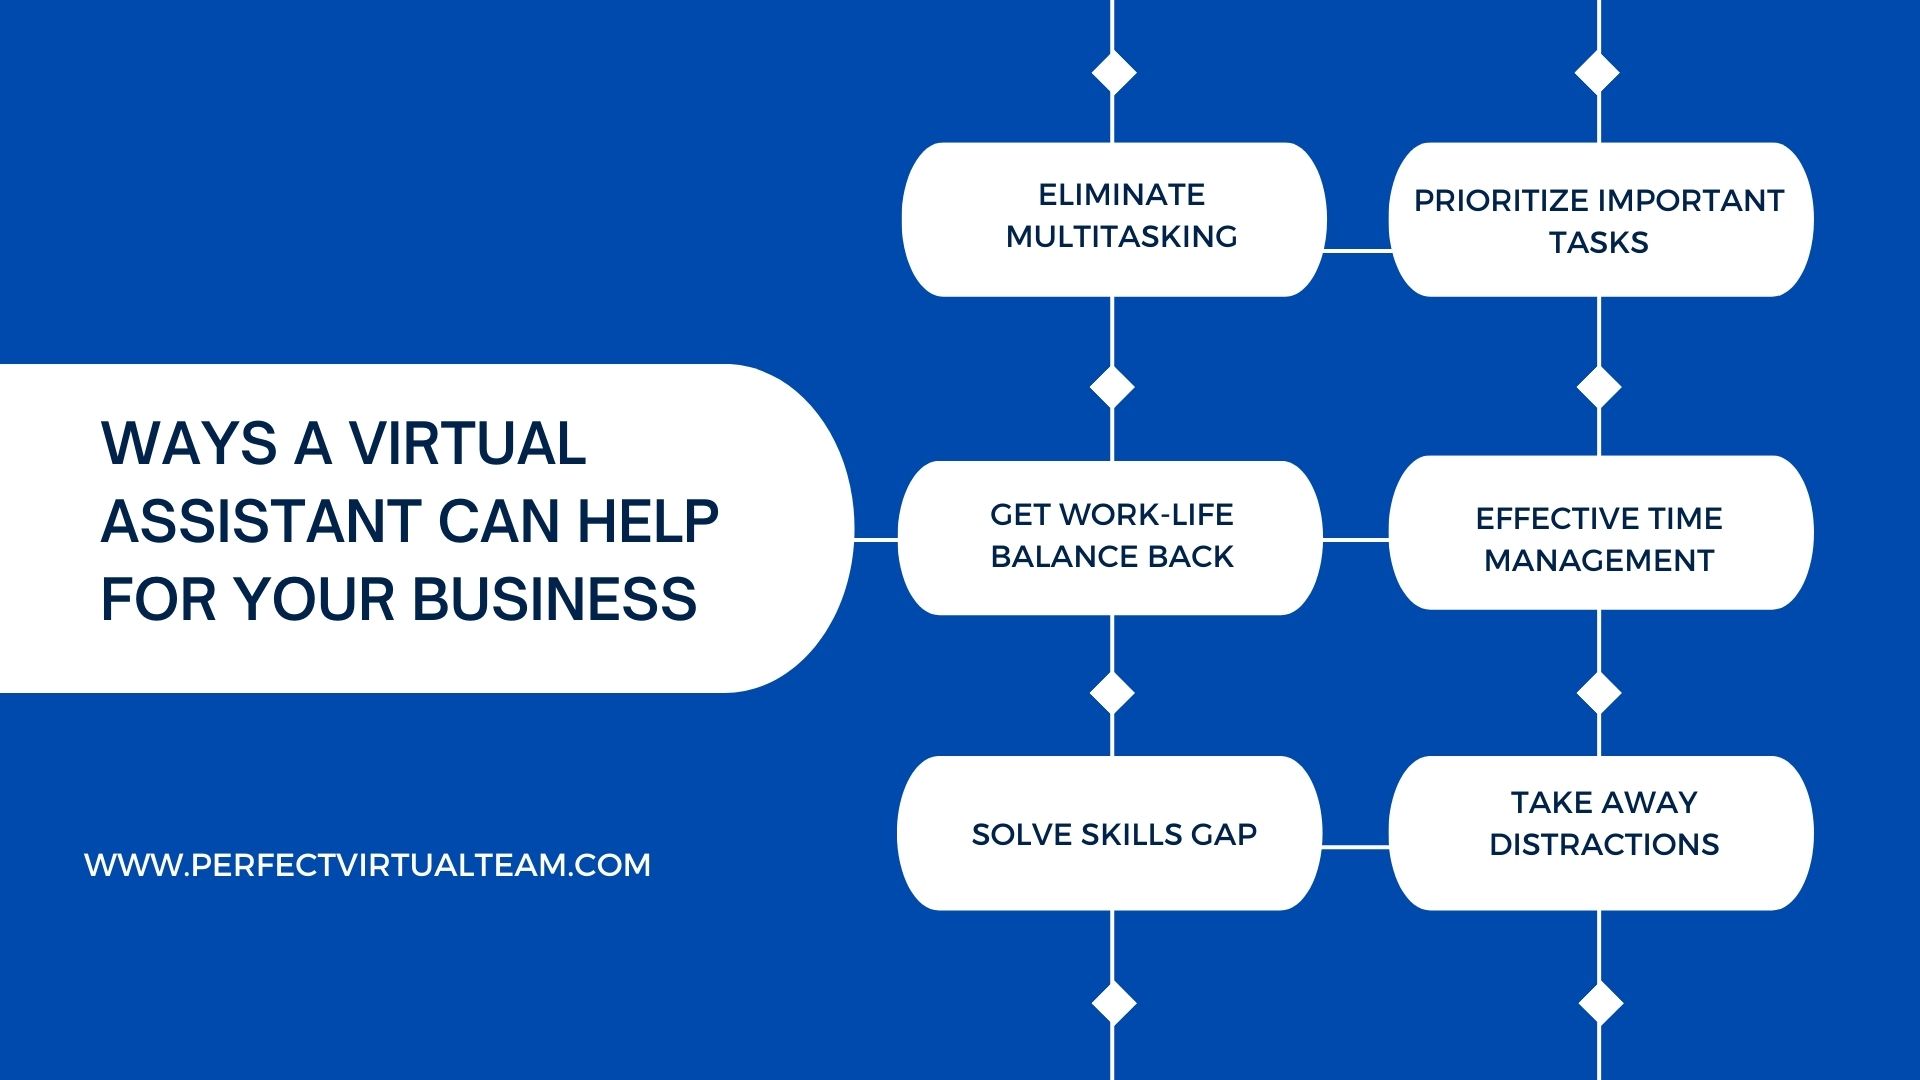 Virtual Assistant can make your business operations more efficient
